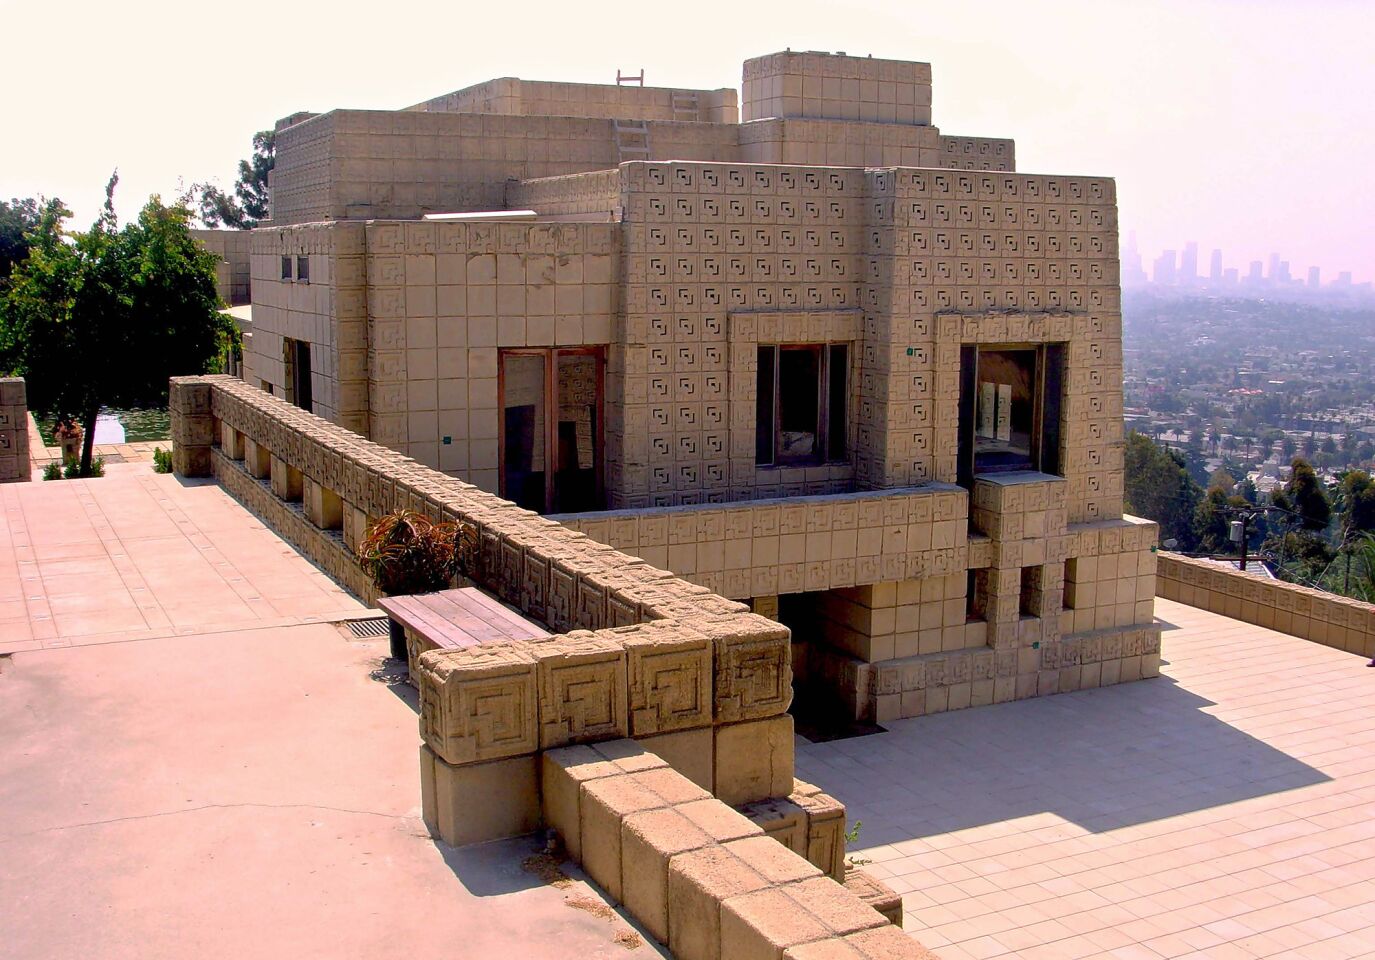 Frank Lloyd Wright, Los Feliz, 1924 The largest and loudest of Wright's four concrete-block houses in L.A., the Ennis House suggests what the greatest of Modernists would have done with a commission from the Maya Empire 700 years earlier. A heavy, elongated mass constructed of 16-by-16-inch concrete blocks (most textured with an ornate pattern) and sited majestically on a hilltop overlooking Griffith Park, the building appears to be more than a house -- an elegant fortification, perhaps, or a temple.